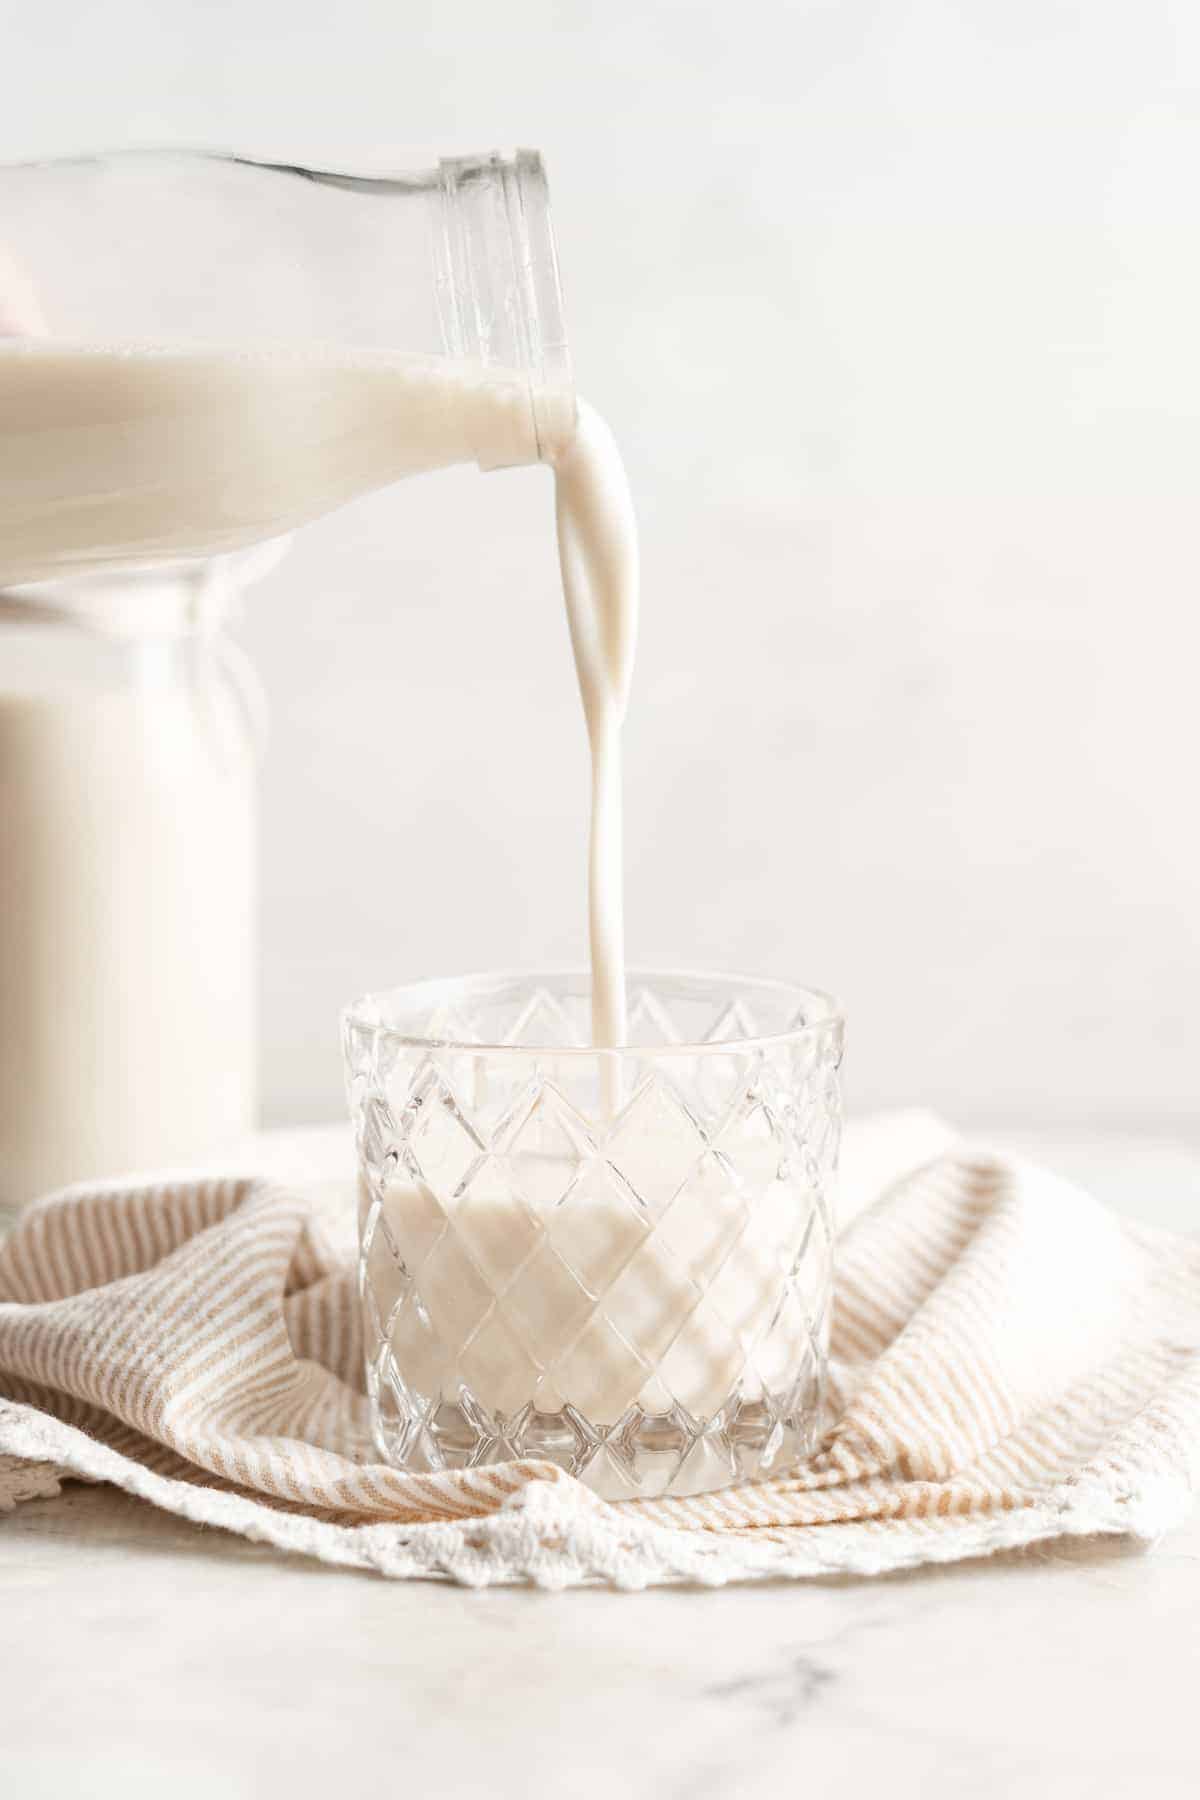 Pouring soy milk into a glass